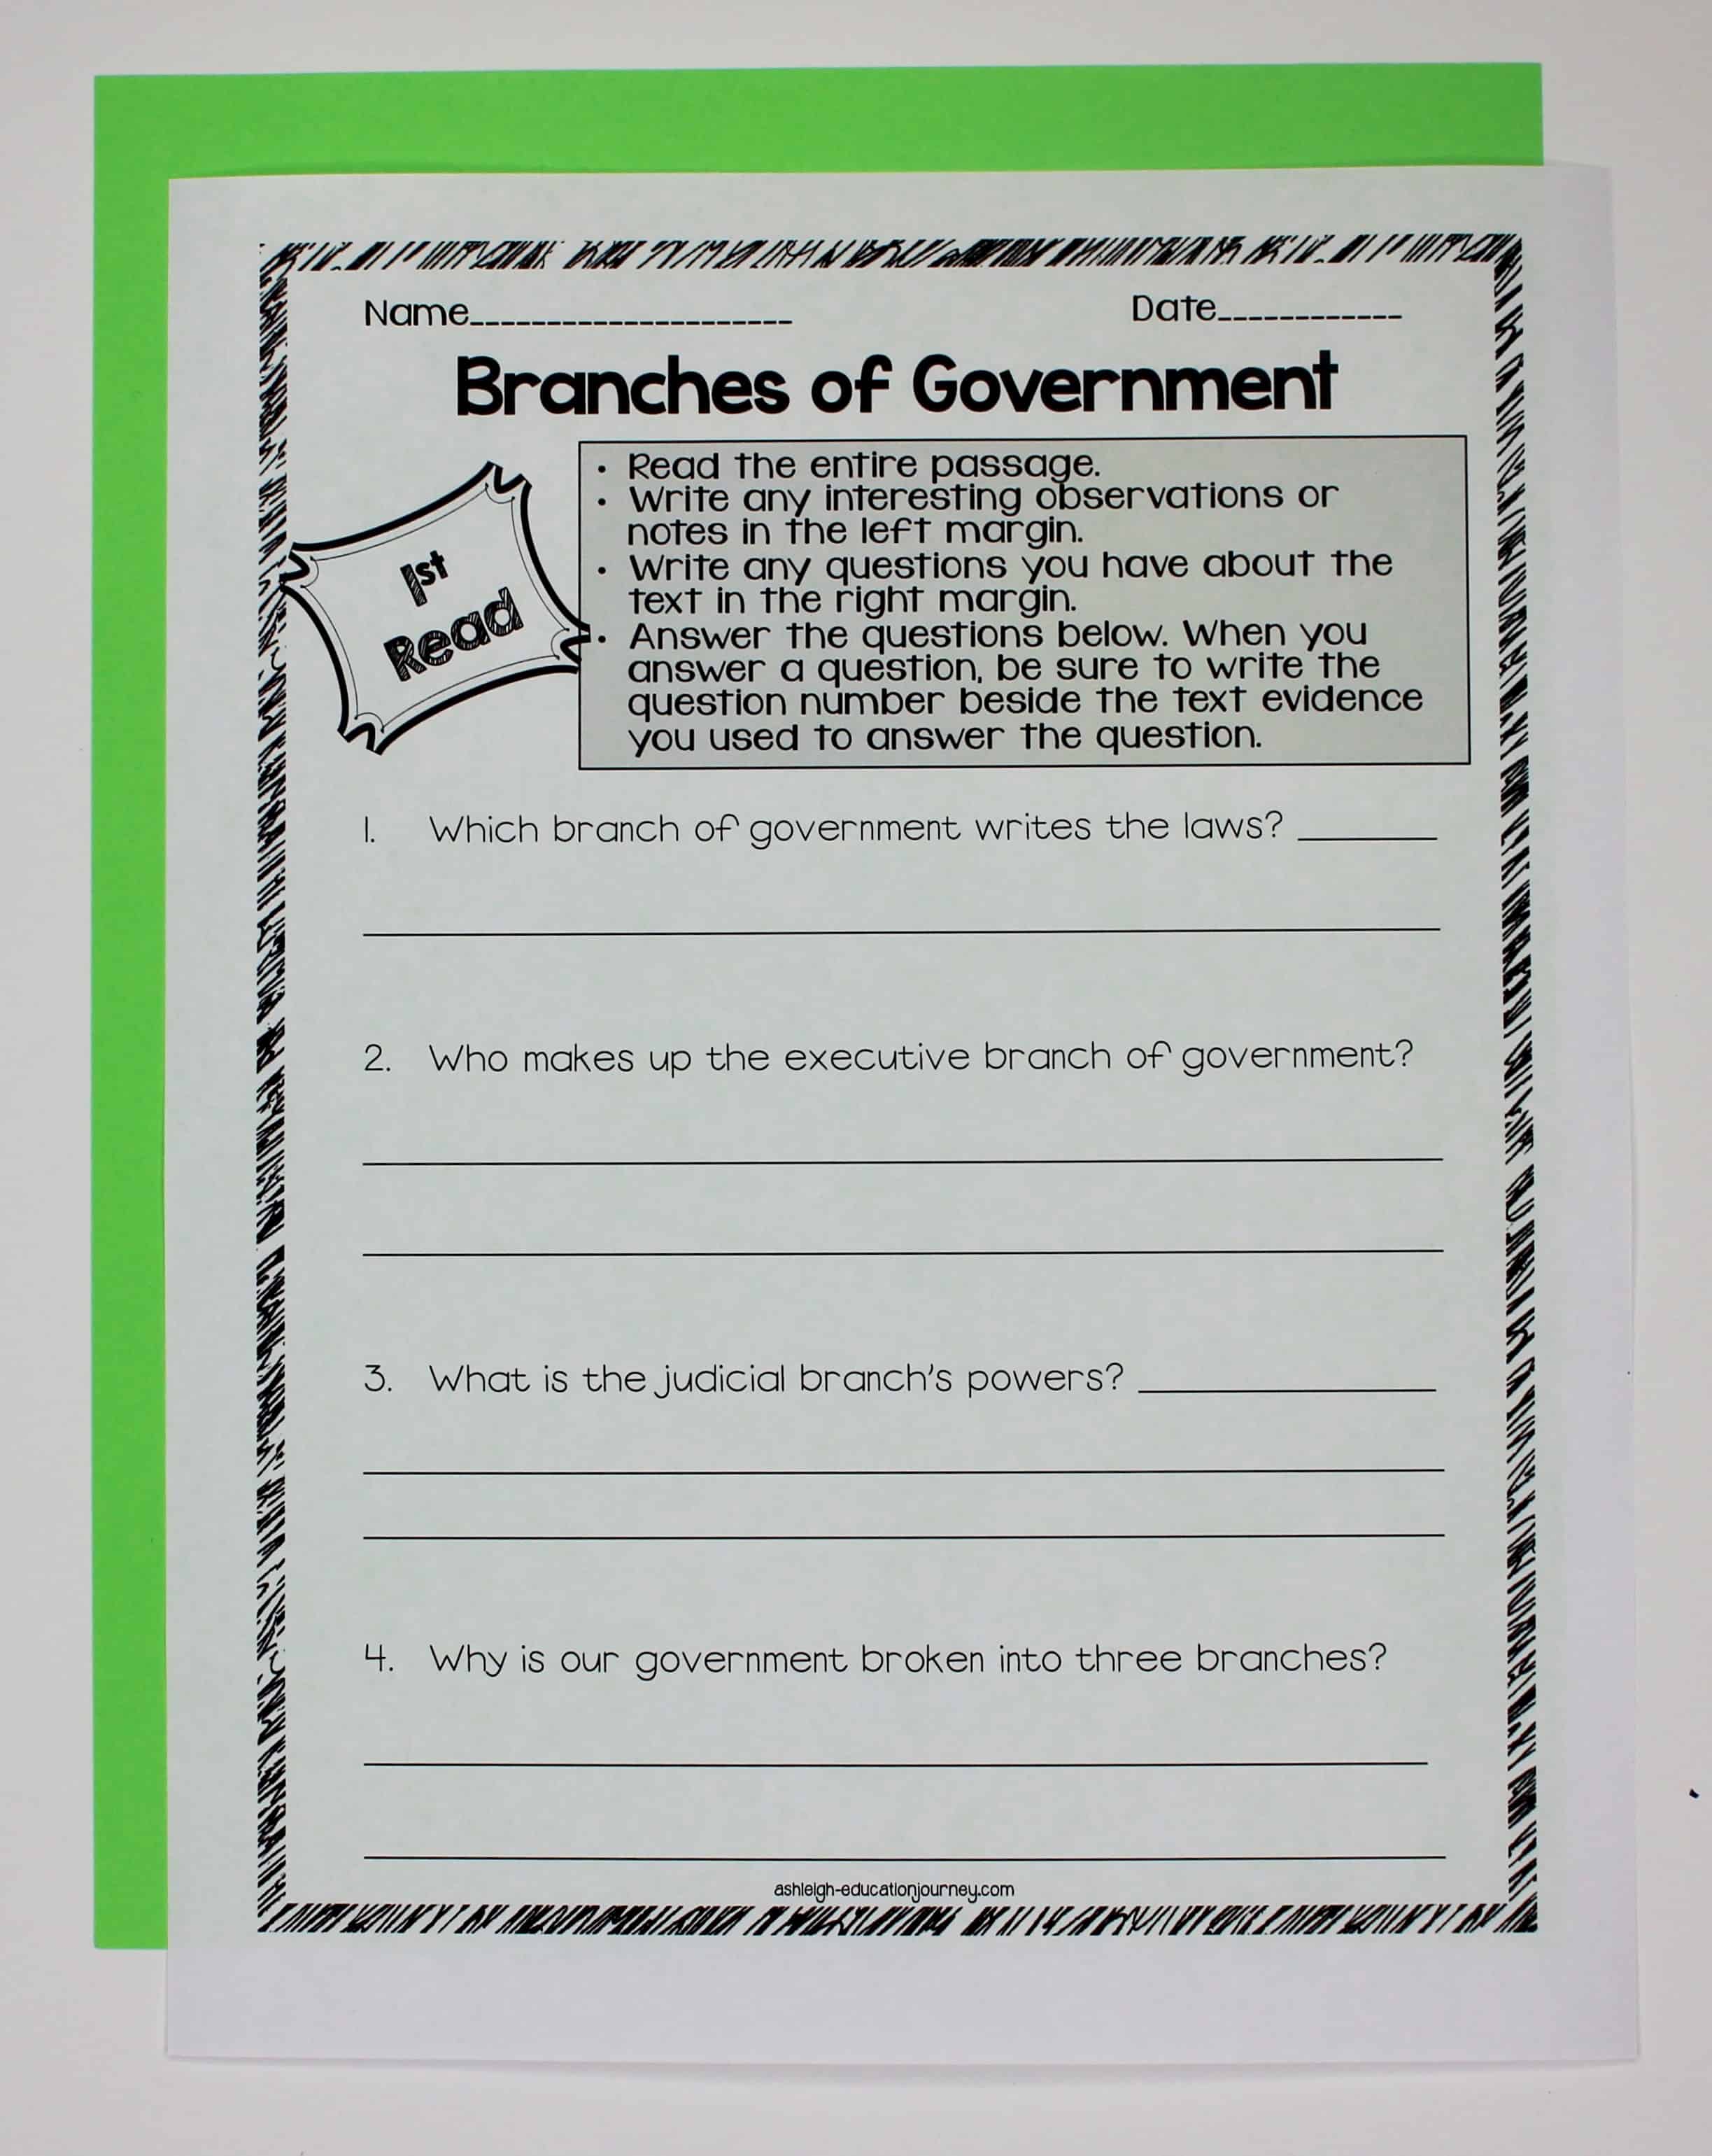 Are you teaching government to your upper elementary class? If so, then these government close reading activities will be a huge help in giving your students the tools they need to understand American government! I created these resources for 3rd grade, 4th grade, and 5th grade classes, and you can click through now to learn more about how you can use these government close reading activities in your class!